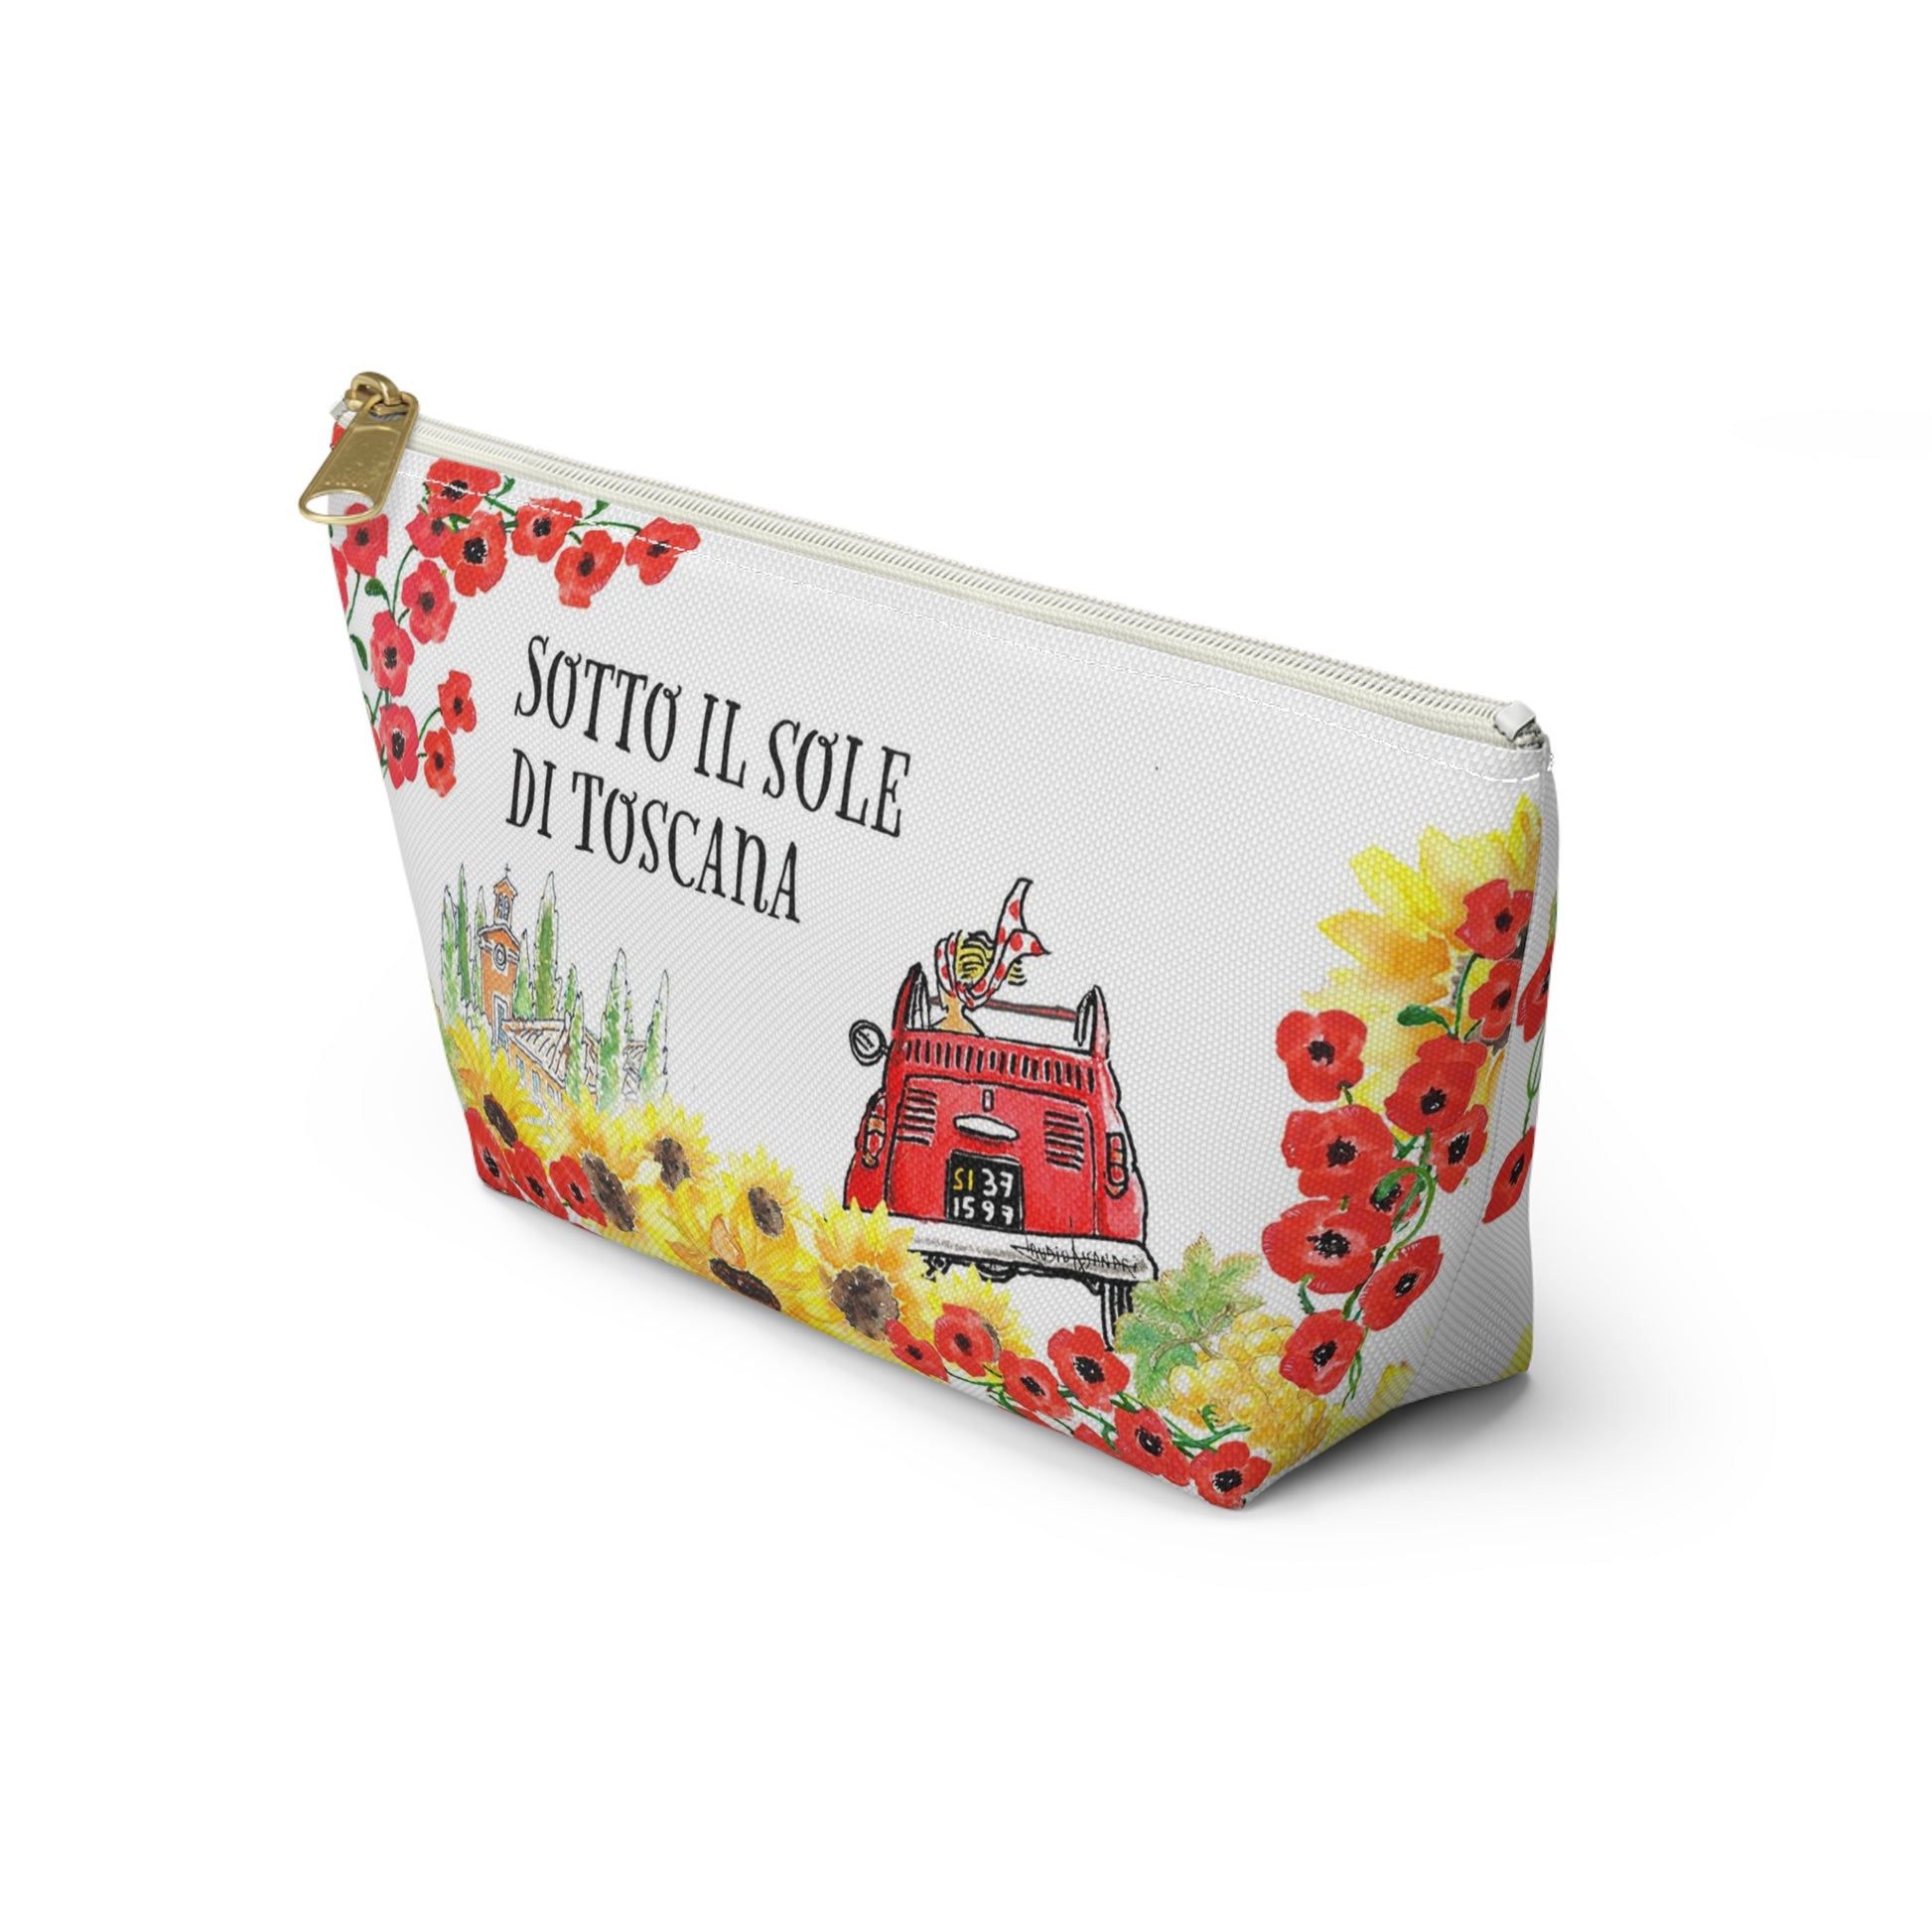 Clutch CIAO Tuscany By Italian Summers! Get a piece of Italy in your very hands with this gorgeous clutch decorated with a Tuscan landscape and a vintage Fiat 500 cabrio, plus a dash of flowers and the quote "Sotto il sole di Toscana"